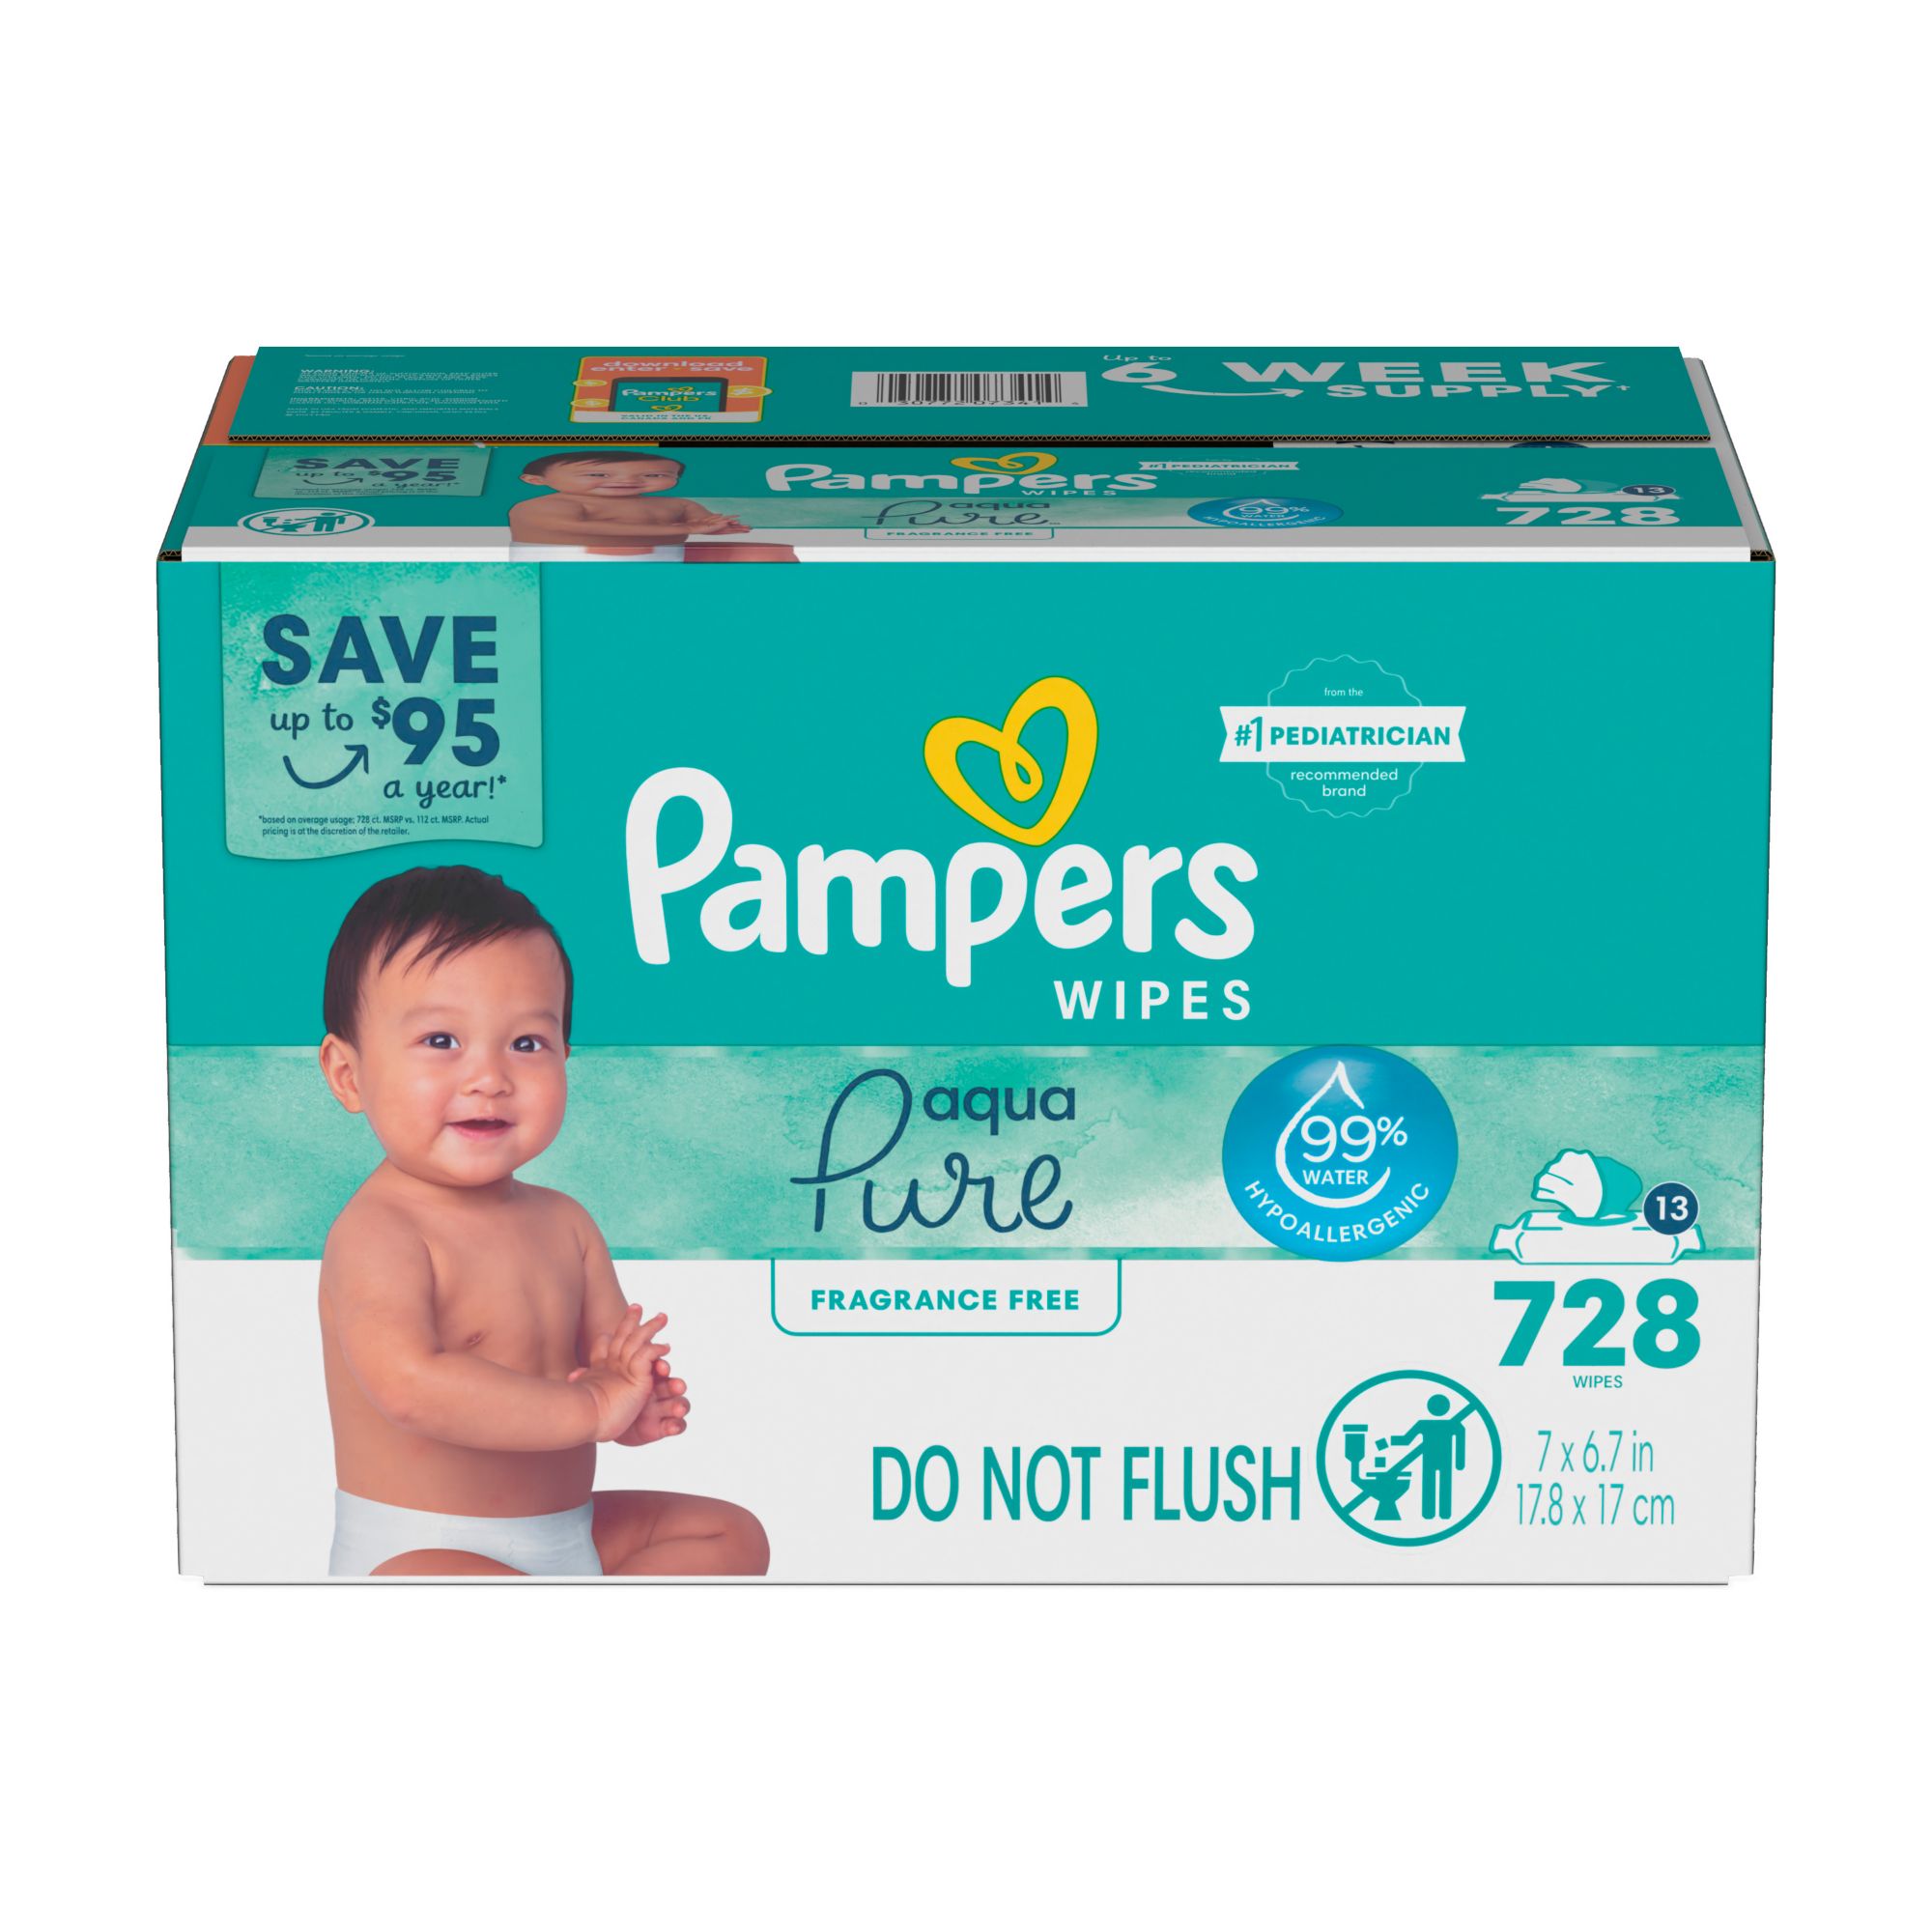 Pampers Aqua Pure Sensitive Baby Wipes with Pop-Top, 13 pk./728 ct.